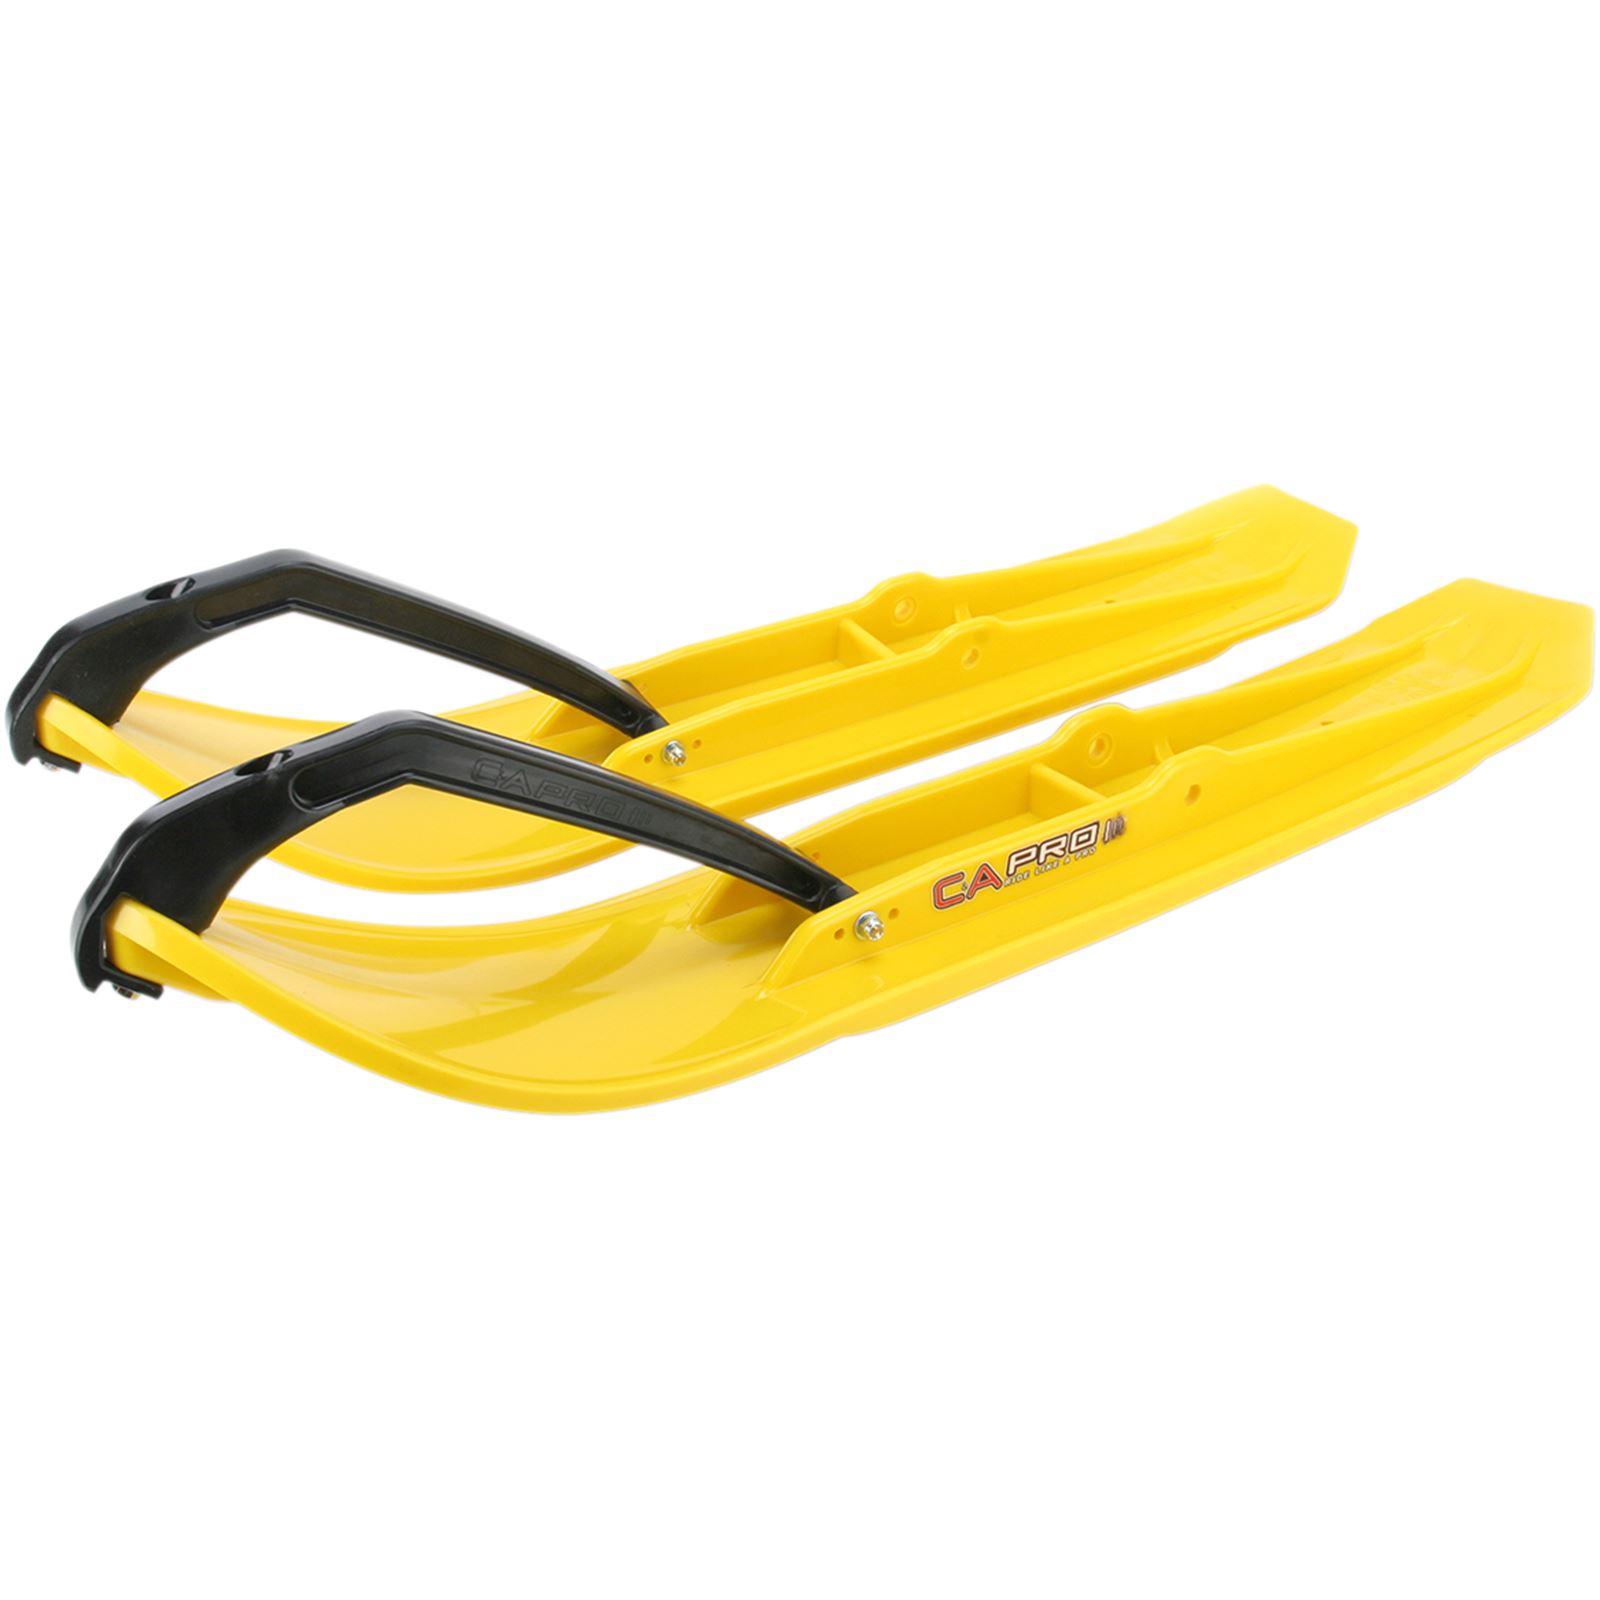 C&A Pro MTX Mountain and Trail Skis - Yellow - 8"